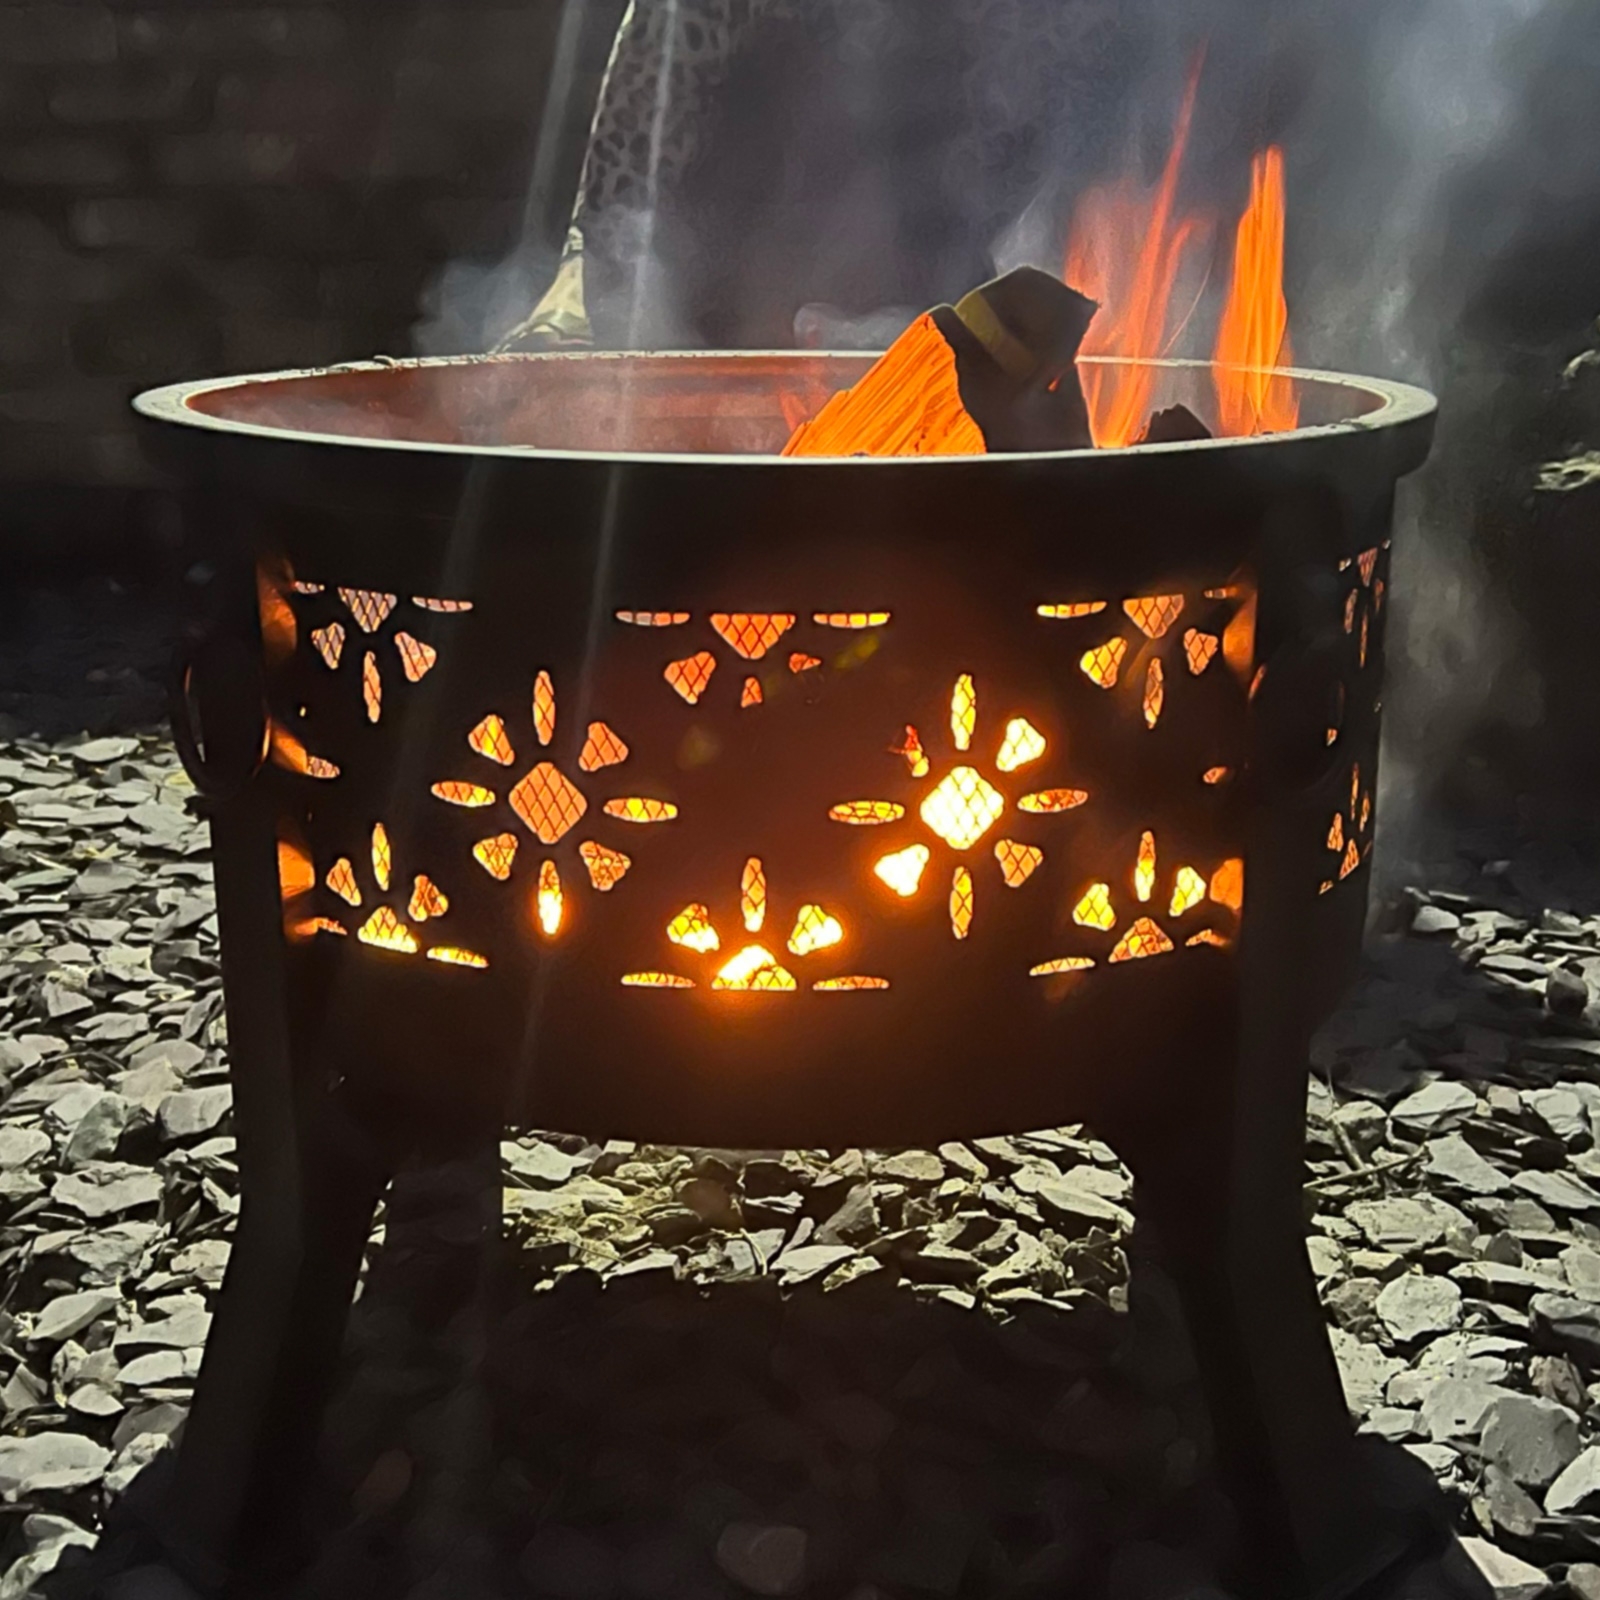 Morroc Fire Pit And Bbq Grill With Rain, Moroccan Fire Pit